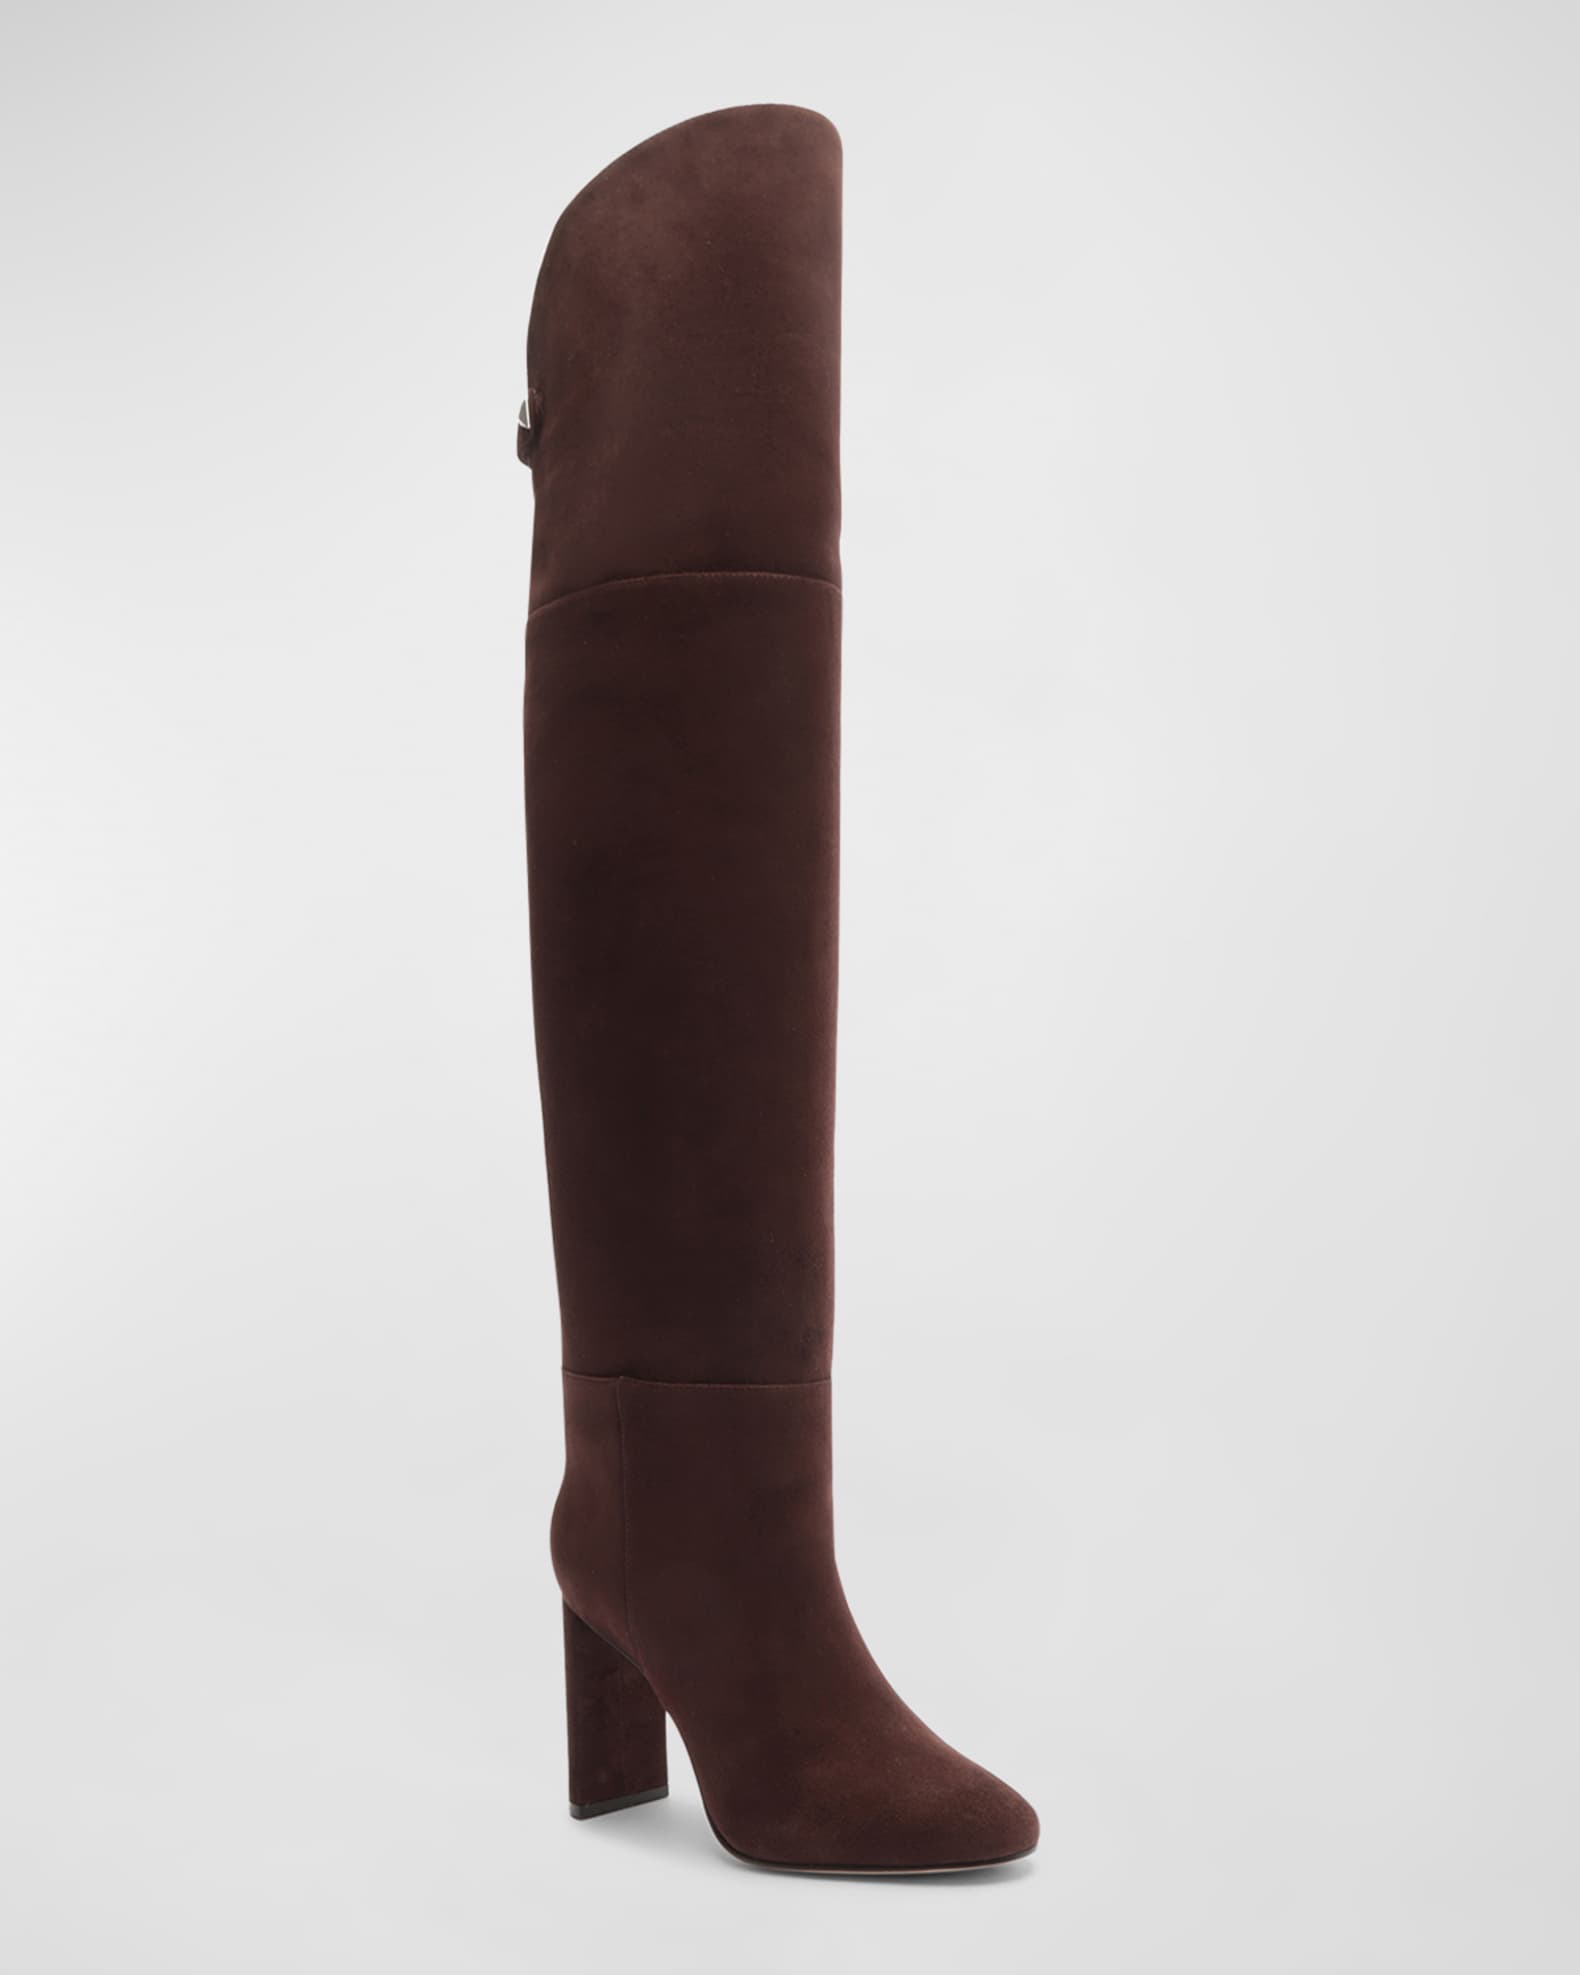 Austine Suede Over-The-Knee Boots